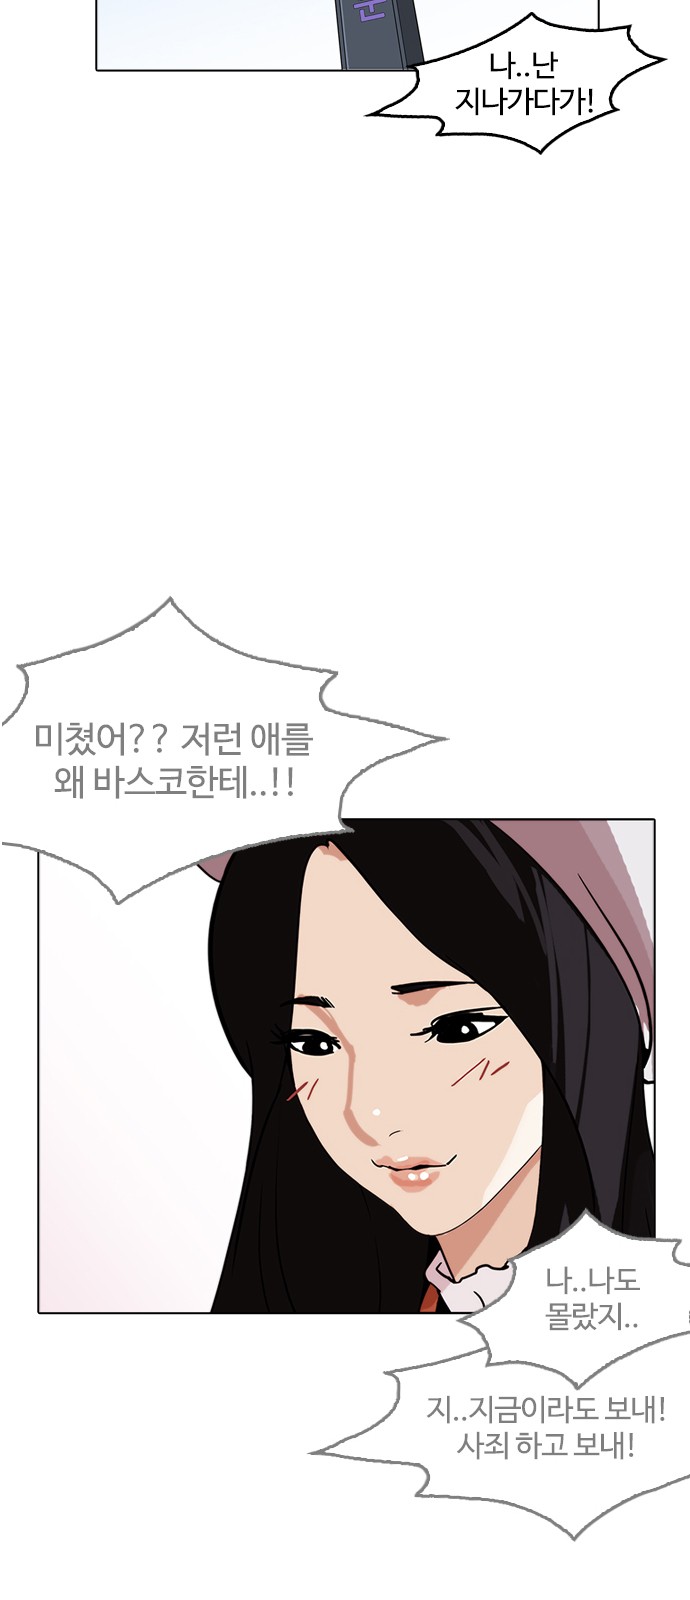 Lookism - Chapter 179 - Page 3